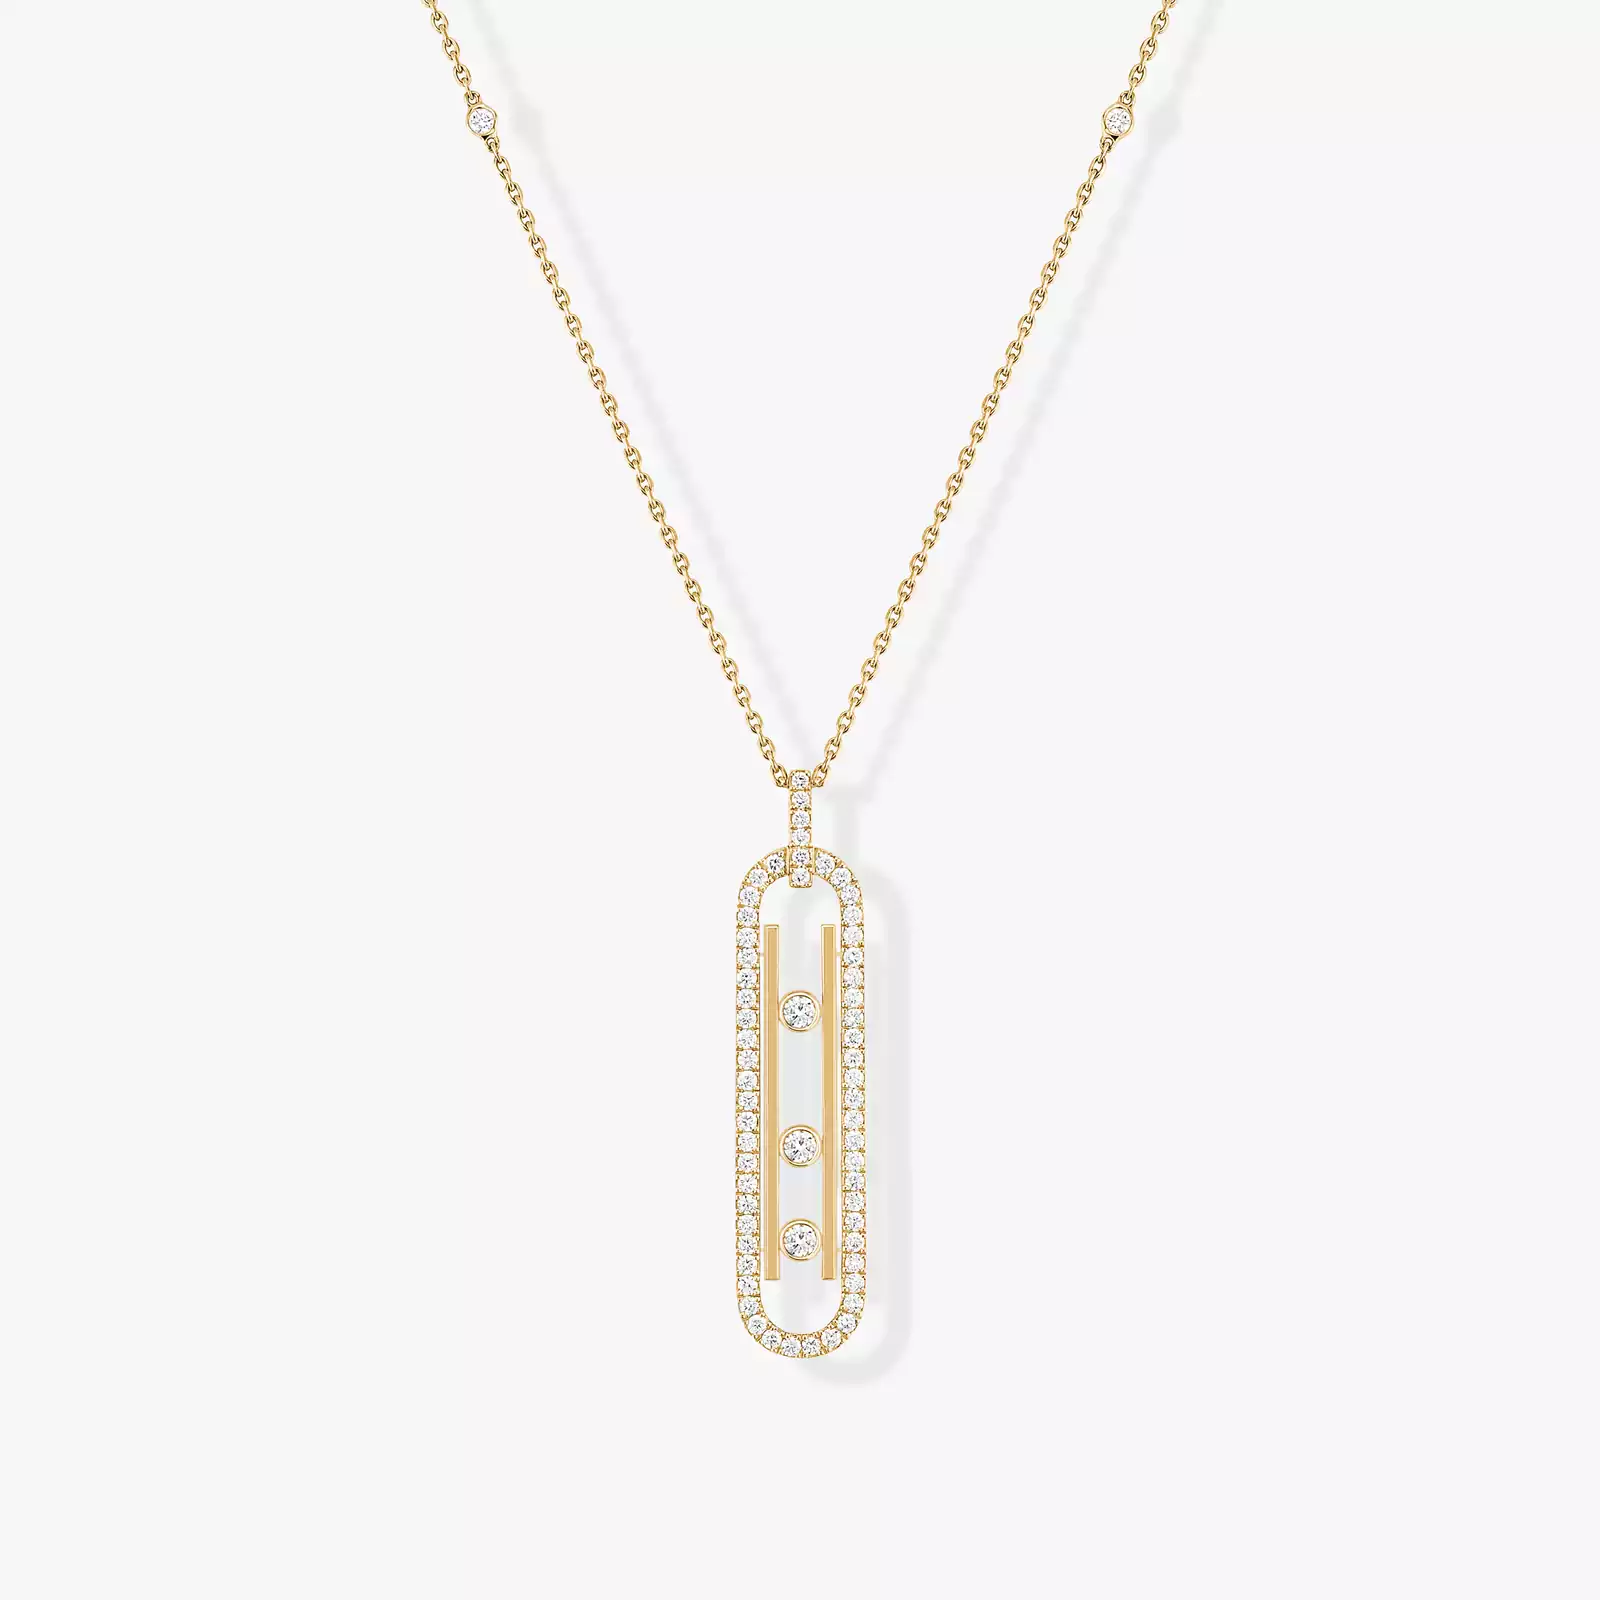 Necklace For Her Yellow Gold Diamond Move 10th SM Necklace 10032-YG